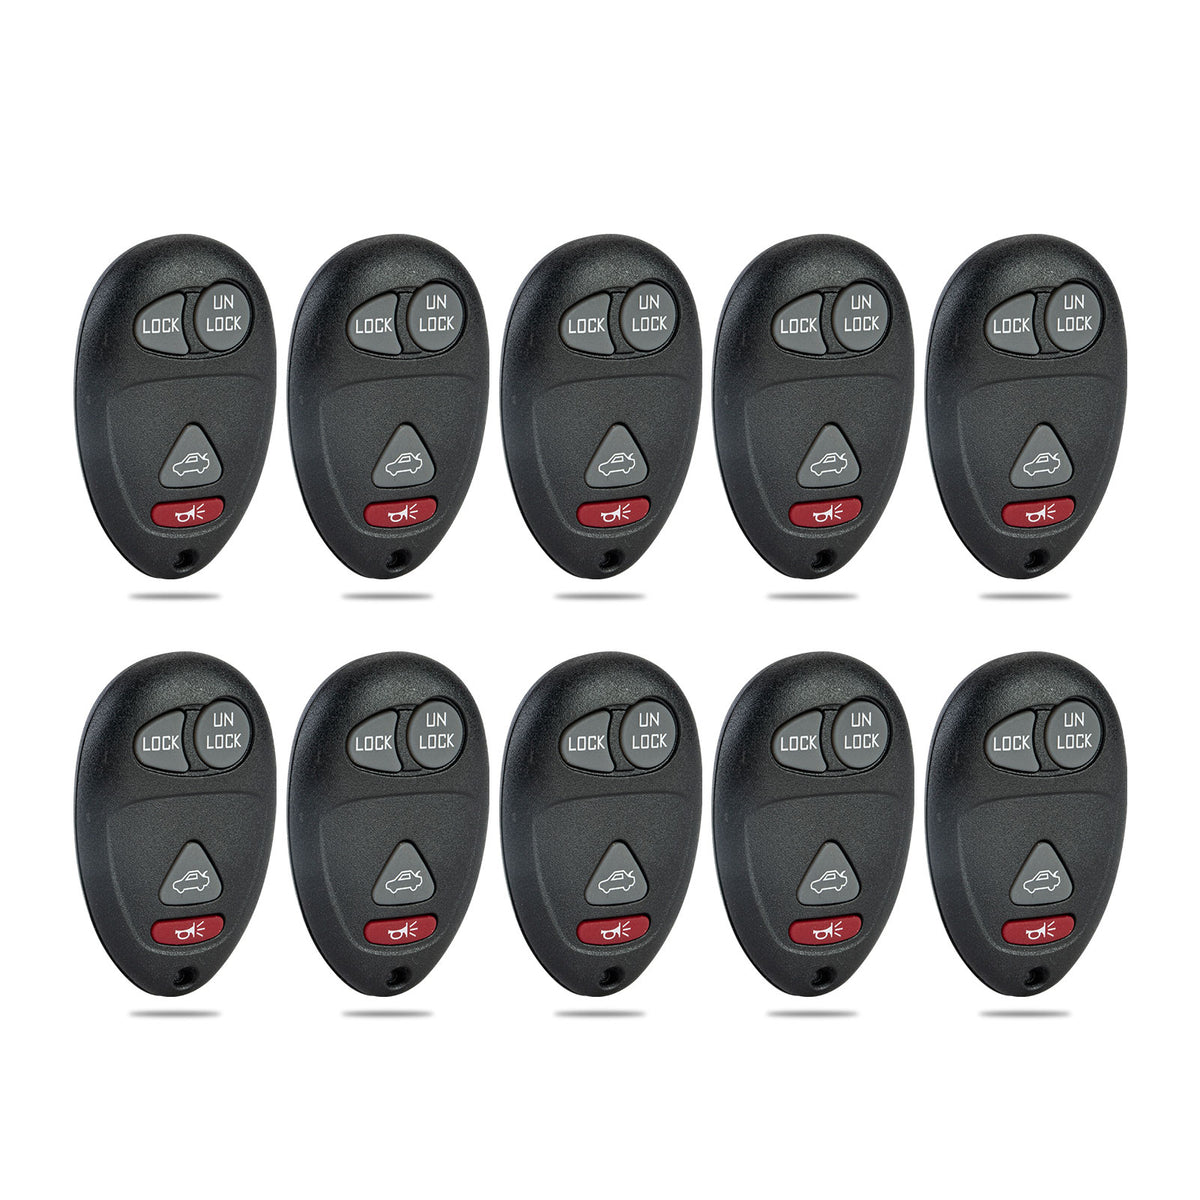 Lots of 10 Extra-Partss Remote Car Key Fob Replacement for Buick L2C0007T fits 2001 2002 2003 2004 Century Regal